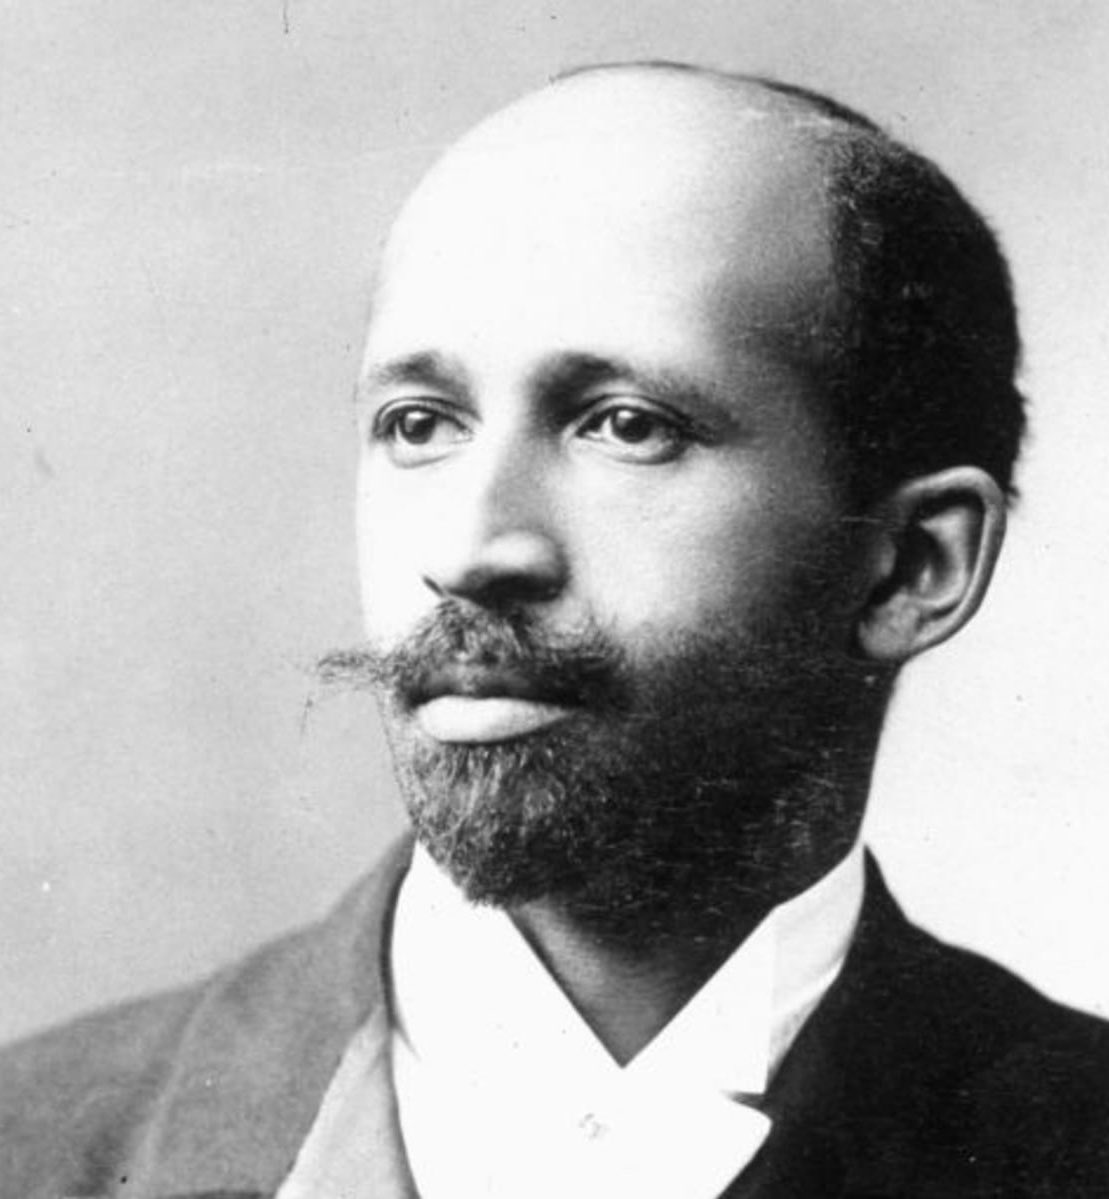 “...primarily among the darker peoples of Asia and Africa.” - W.E.B Du Bois